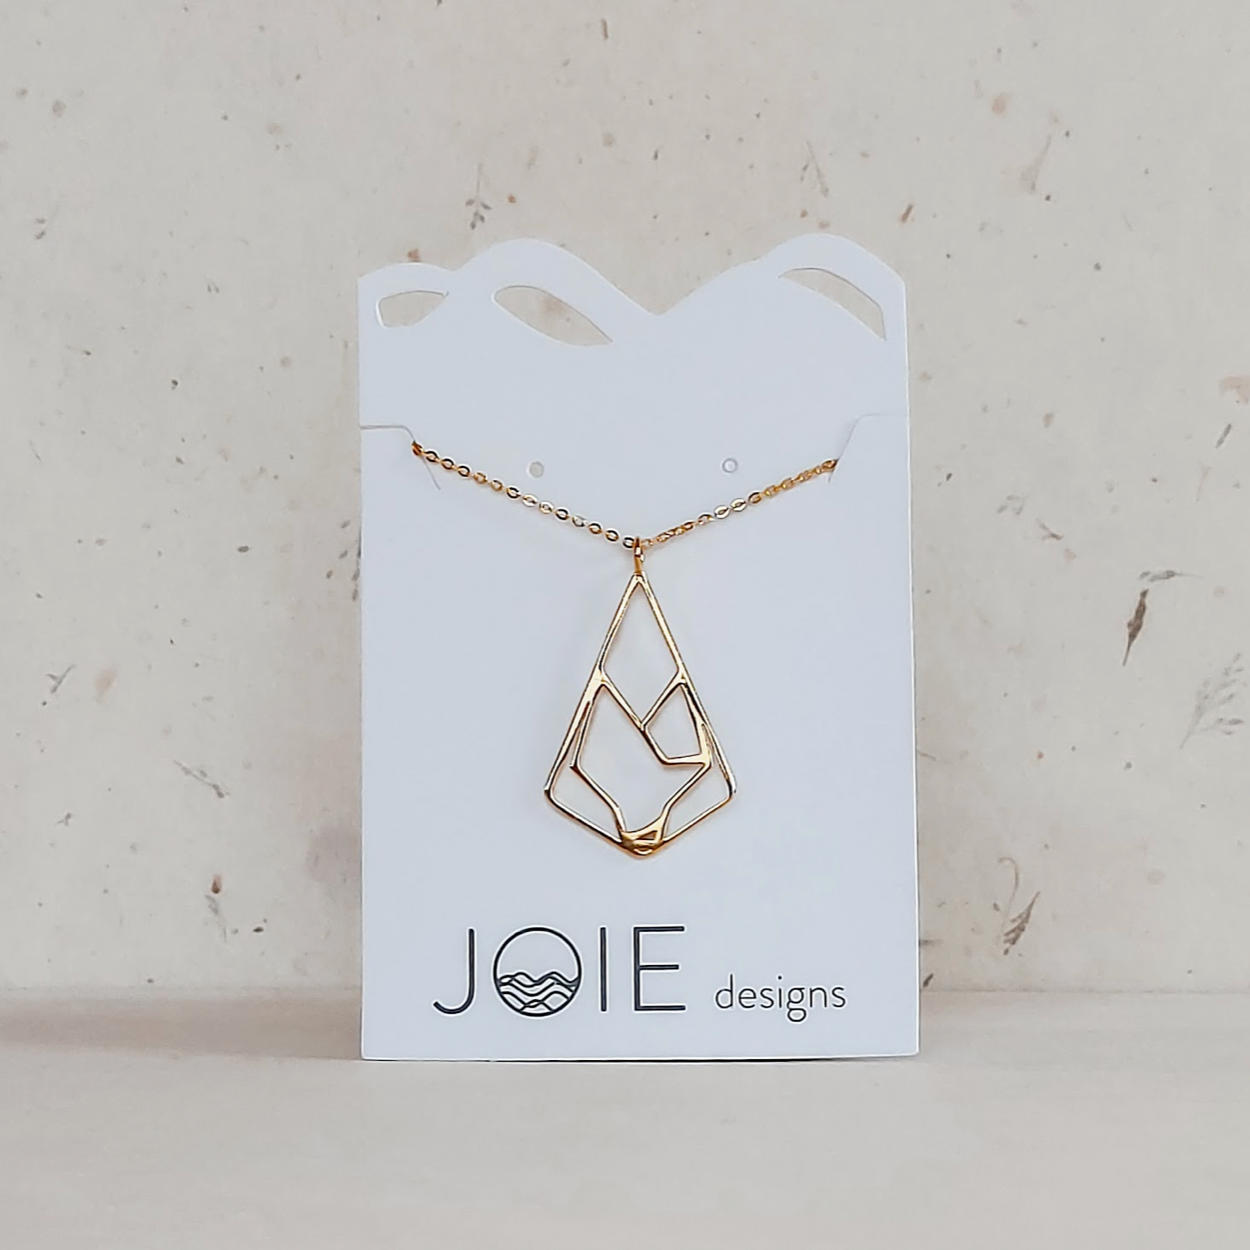 JOIE DESIGNS - 18K GOLD PLATED WOLF NECKLACE